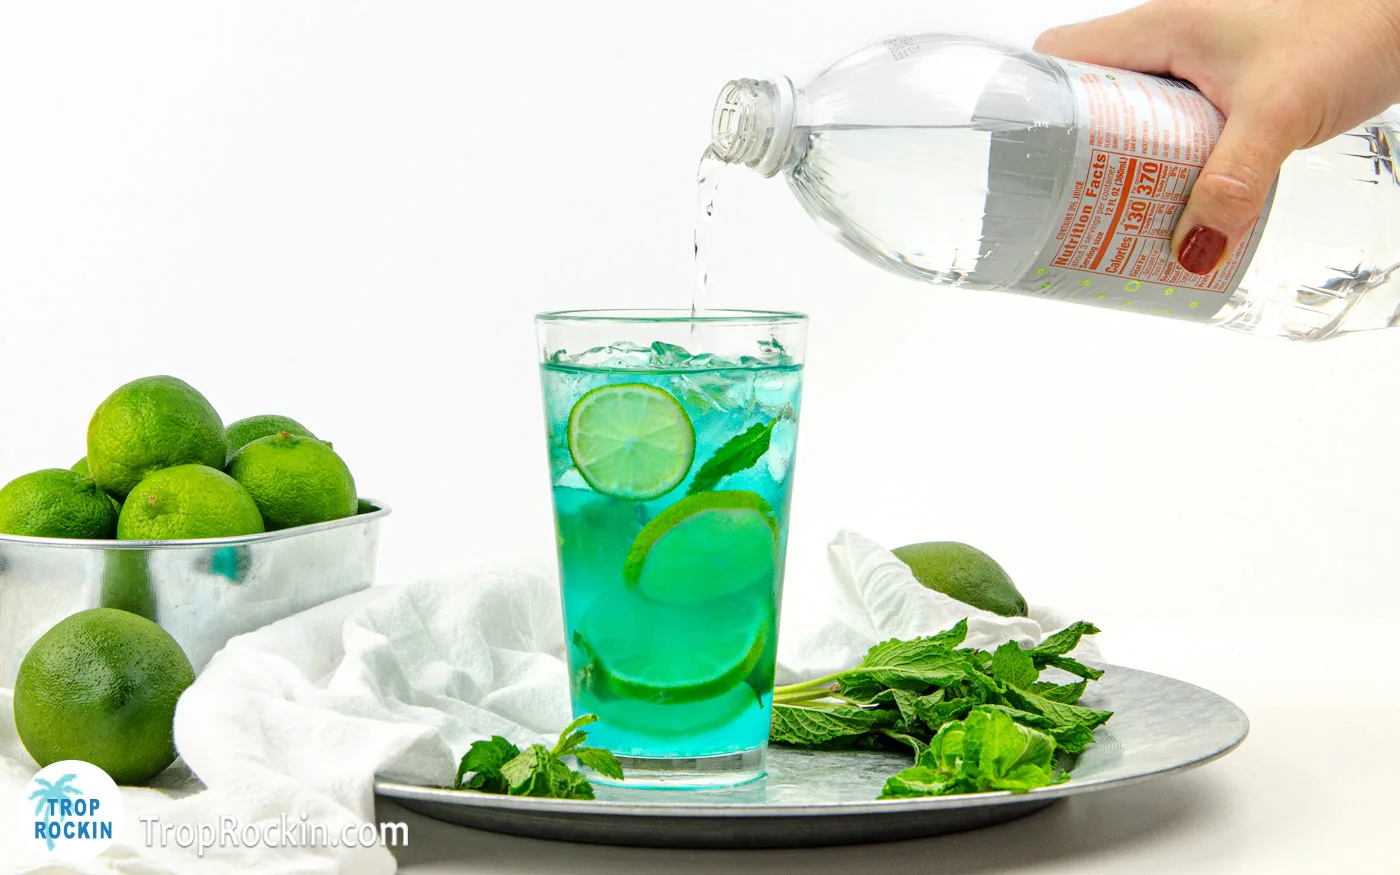 Pouring lime tonic into the drink glass.